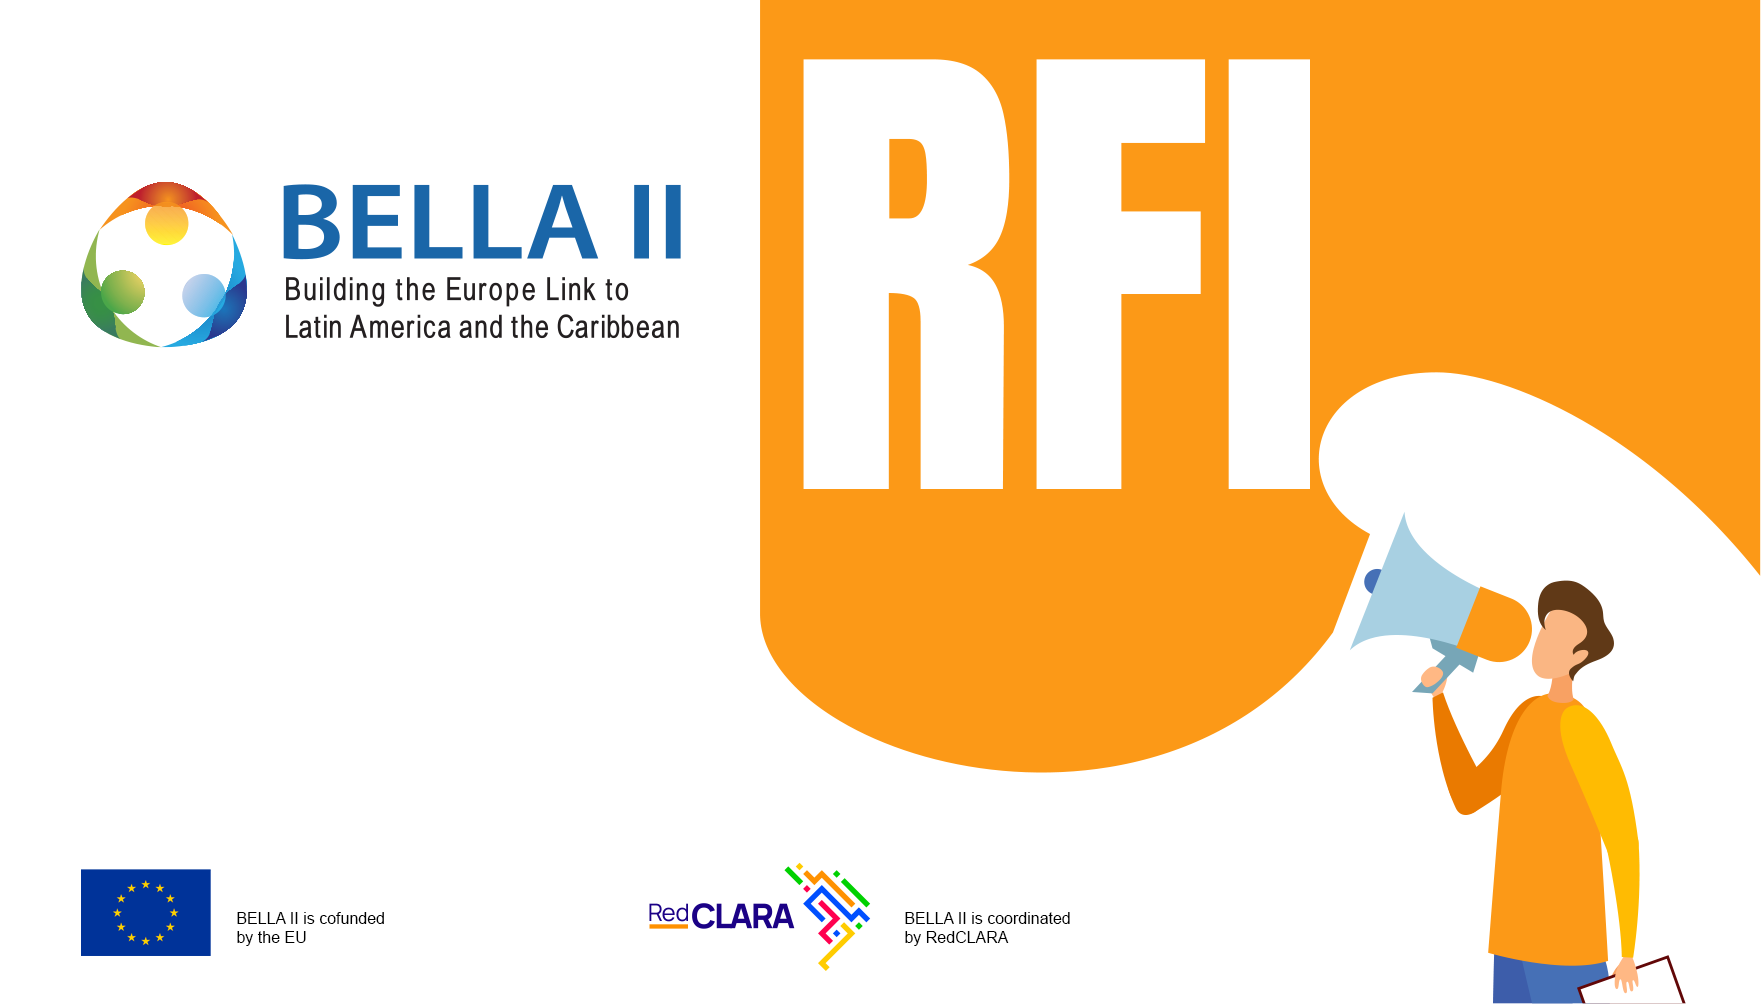 Announcement: RedCLARA invites you to participate in the Request for Information (RFI) to Interested Parties to be part of the BELLA II project